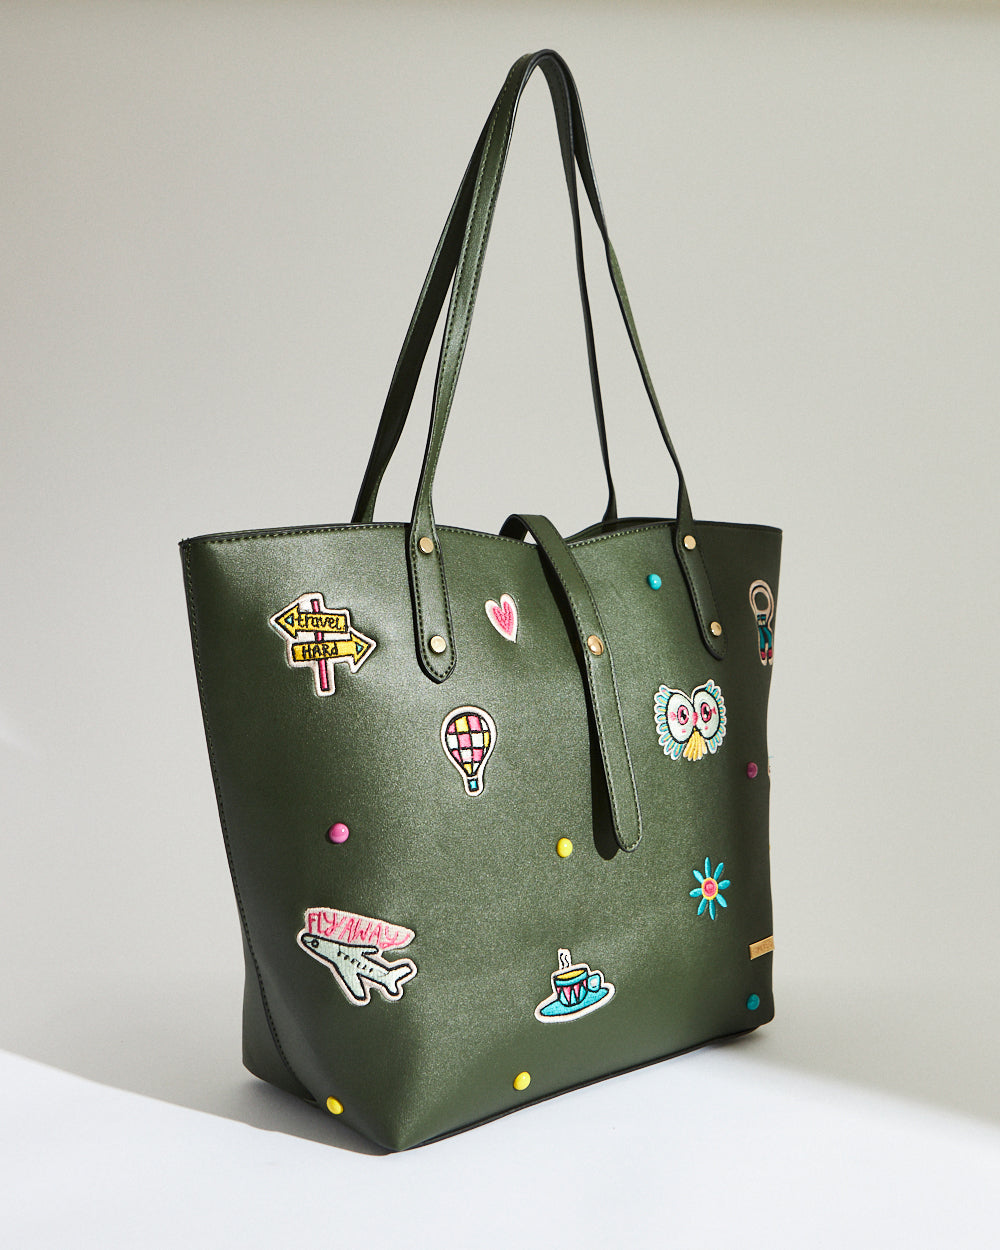 Embroidered Tote | Travel Patches - Tan